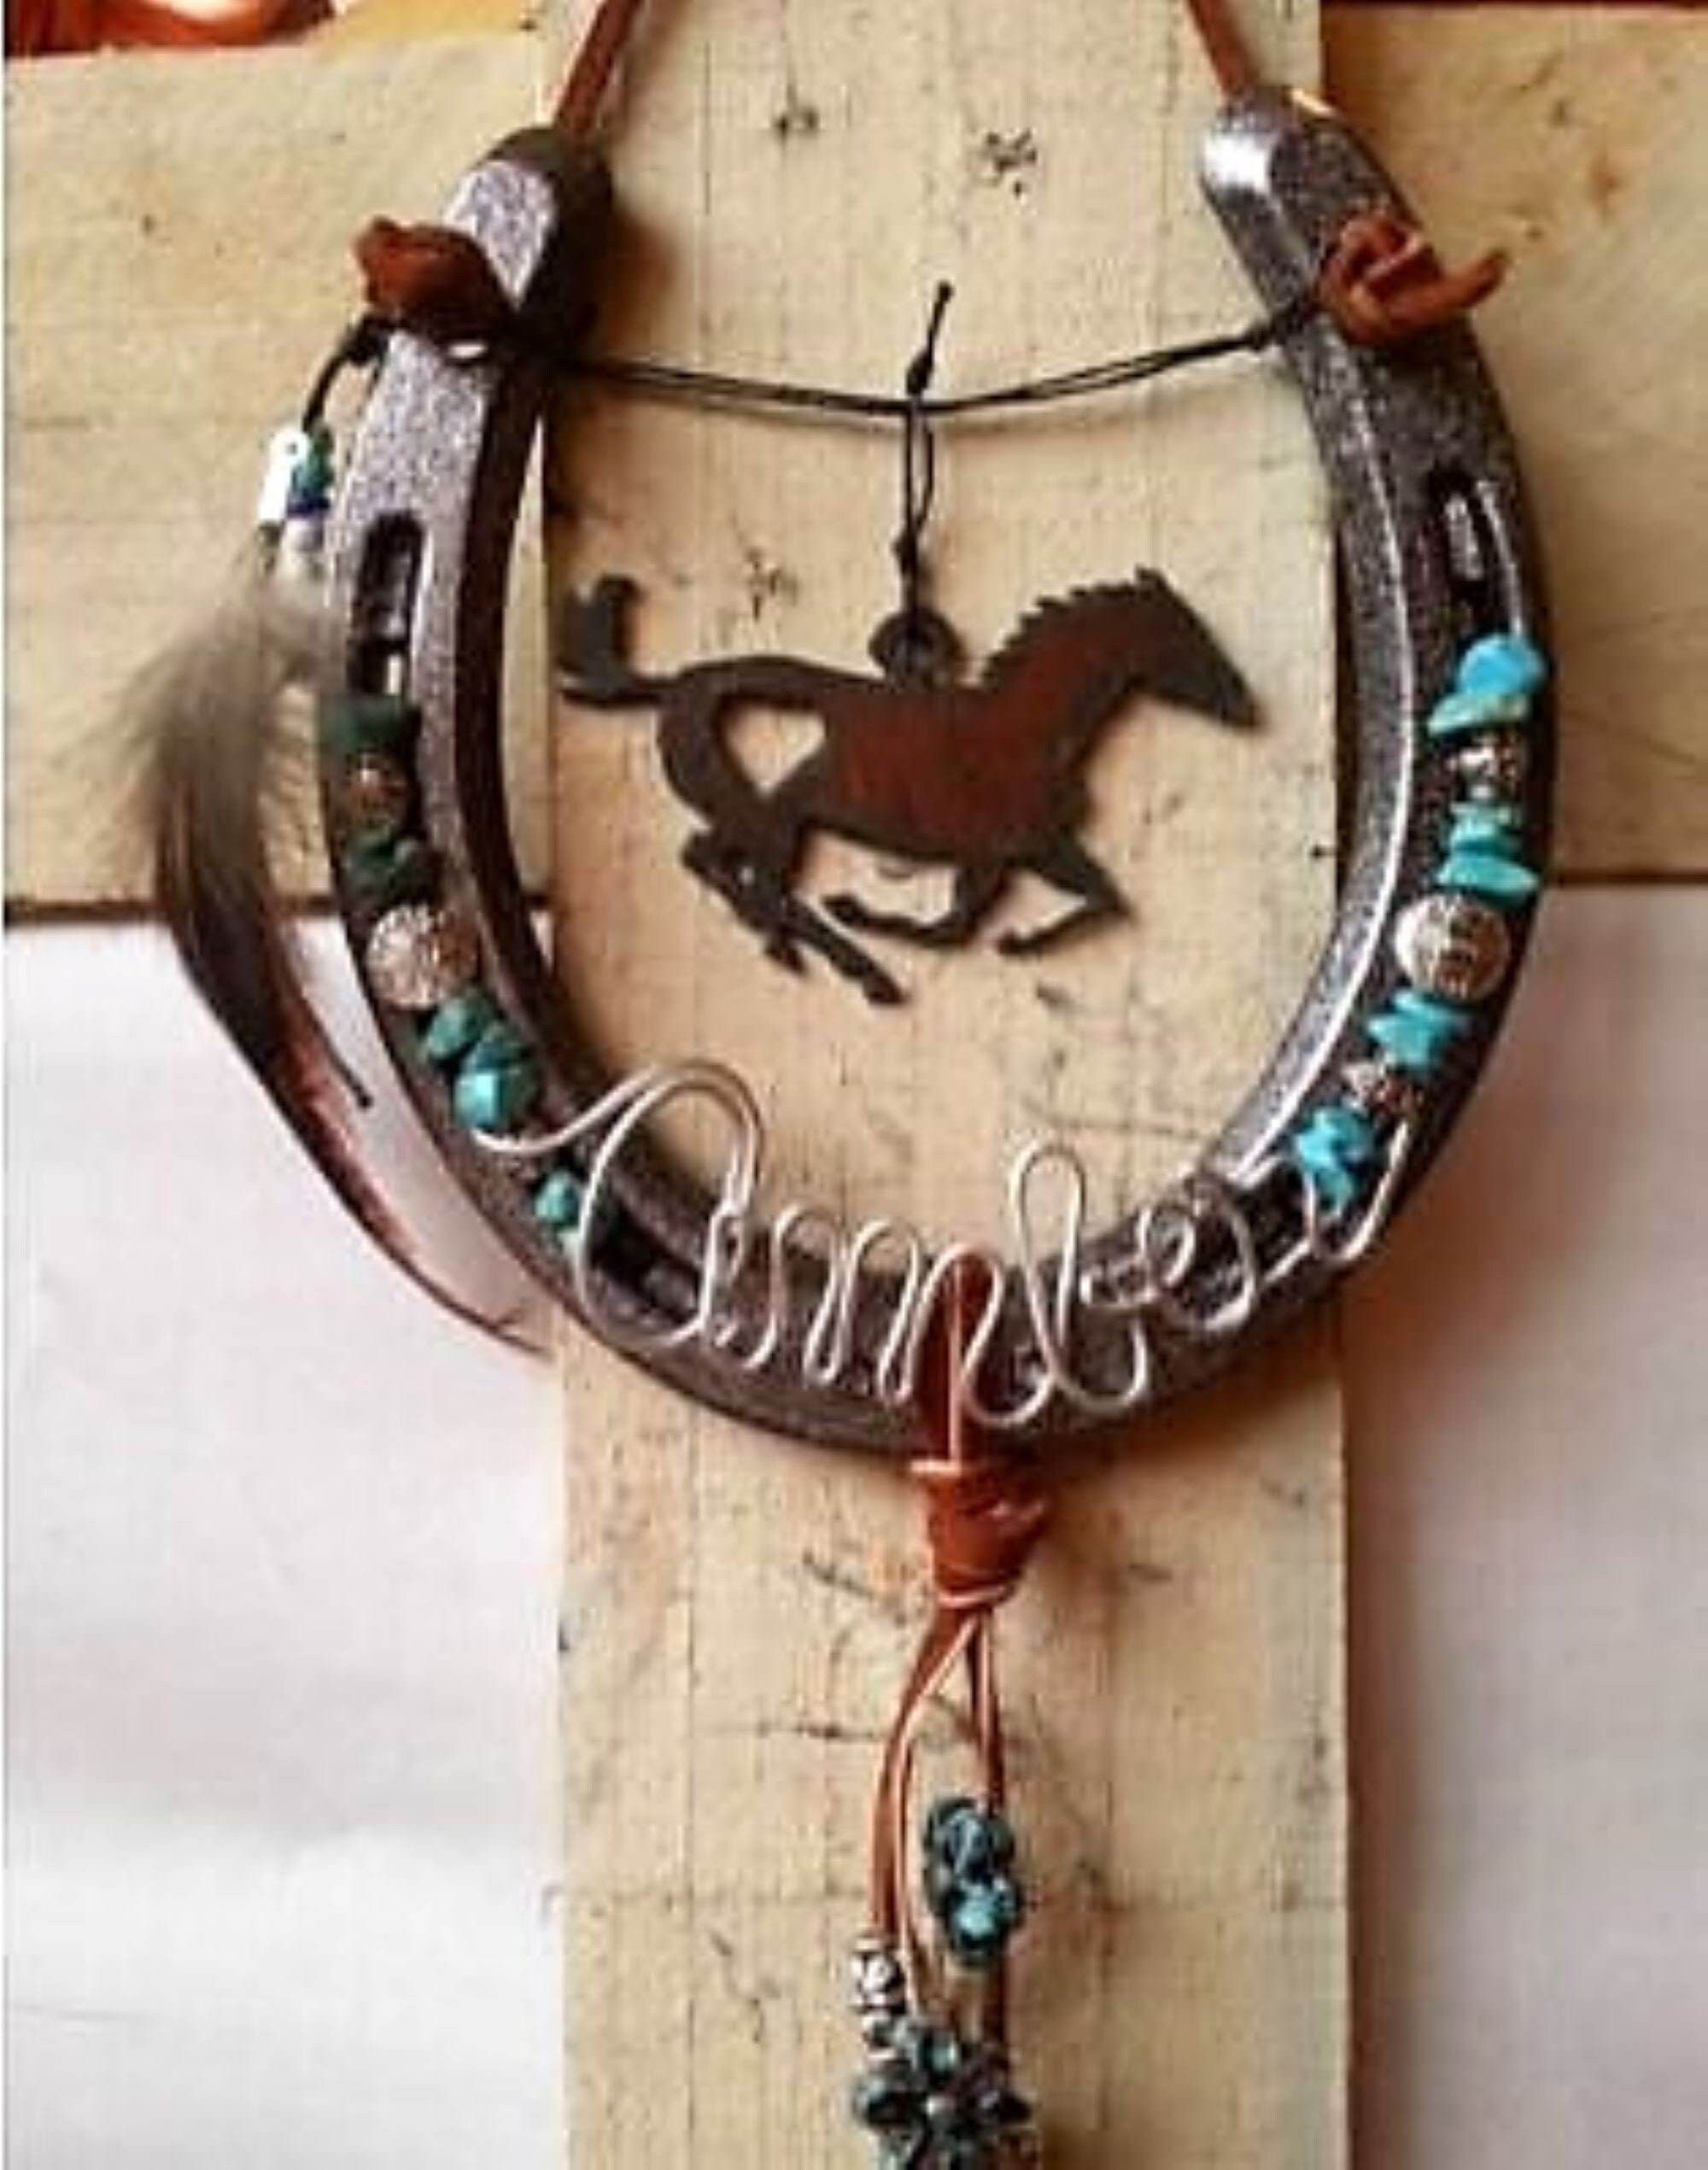  Faith Horseshoe Decor - Unique Gifts for Horse Lovers  Personalized Horse Lover Gifts : Handmade Products